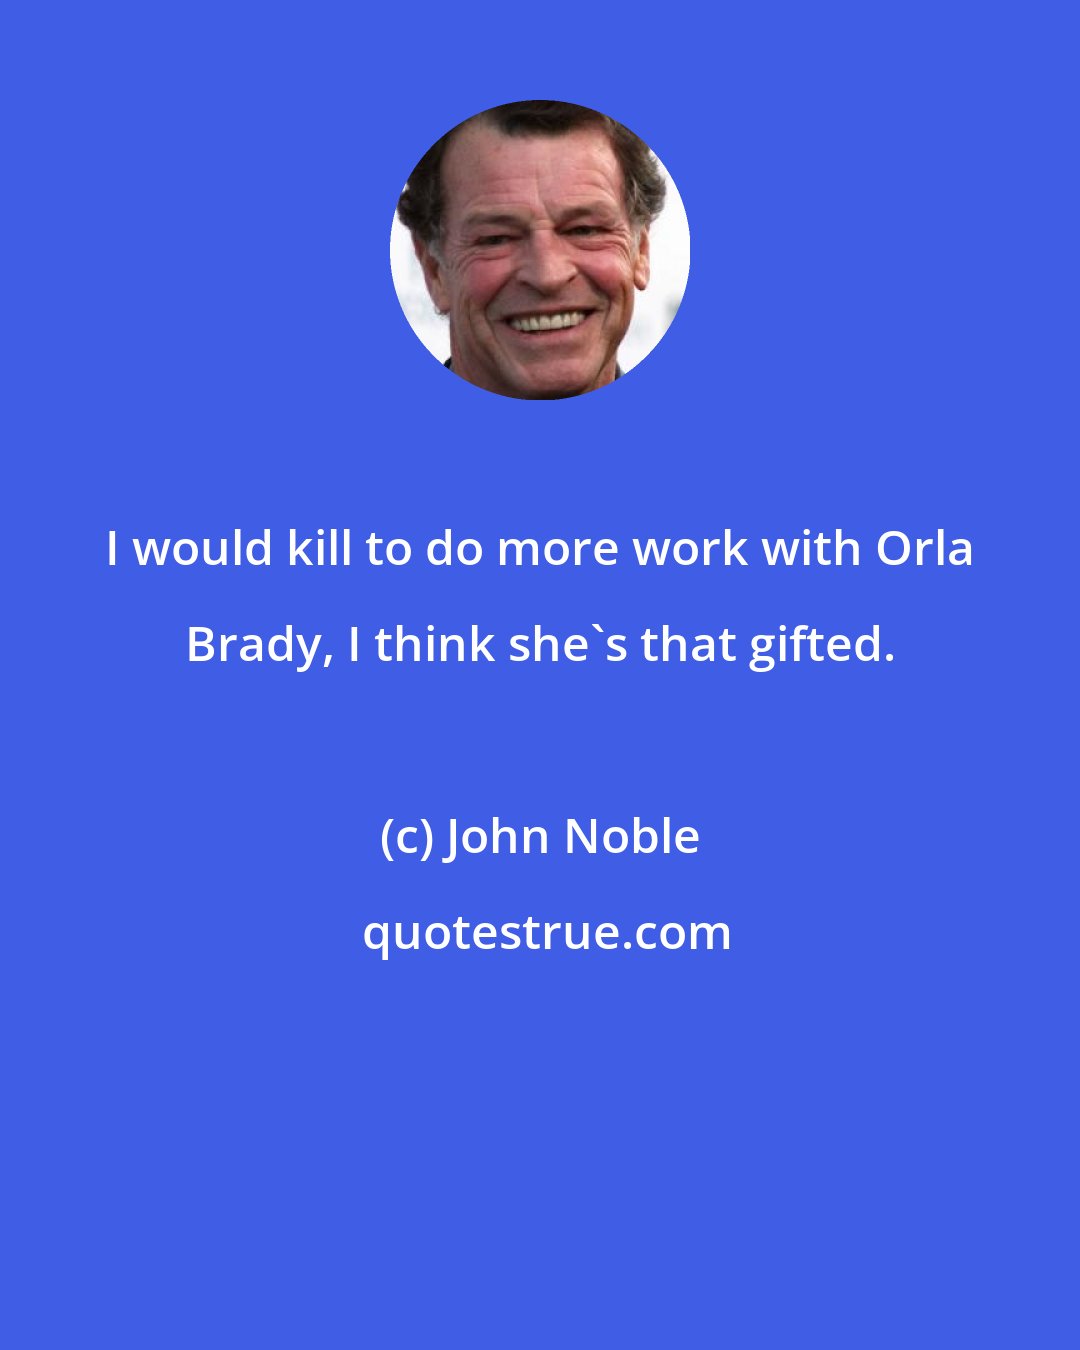 John Noble: I would kill to do more work with Orla Brady, I think she's that gifted.